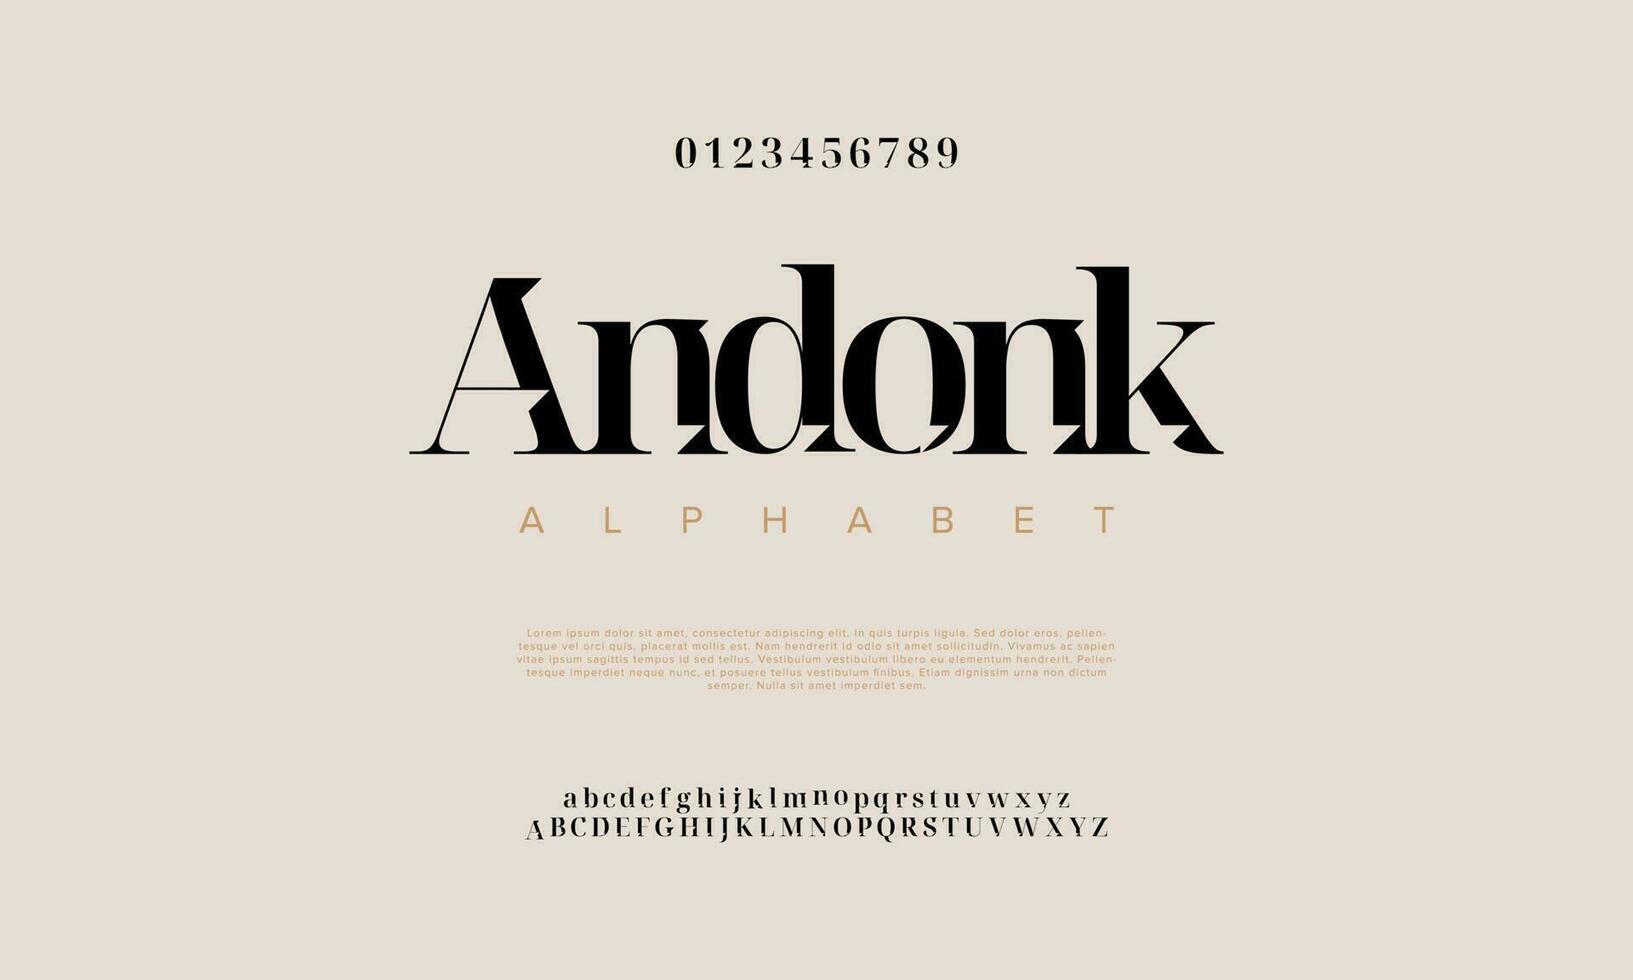 Andonk abstract digital technology logo font alphabet. Minimal modern urban fonts for logo, brand etc. Typography typeface uppercase lowercase and number. vector illustration